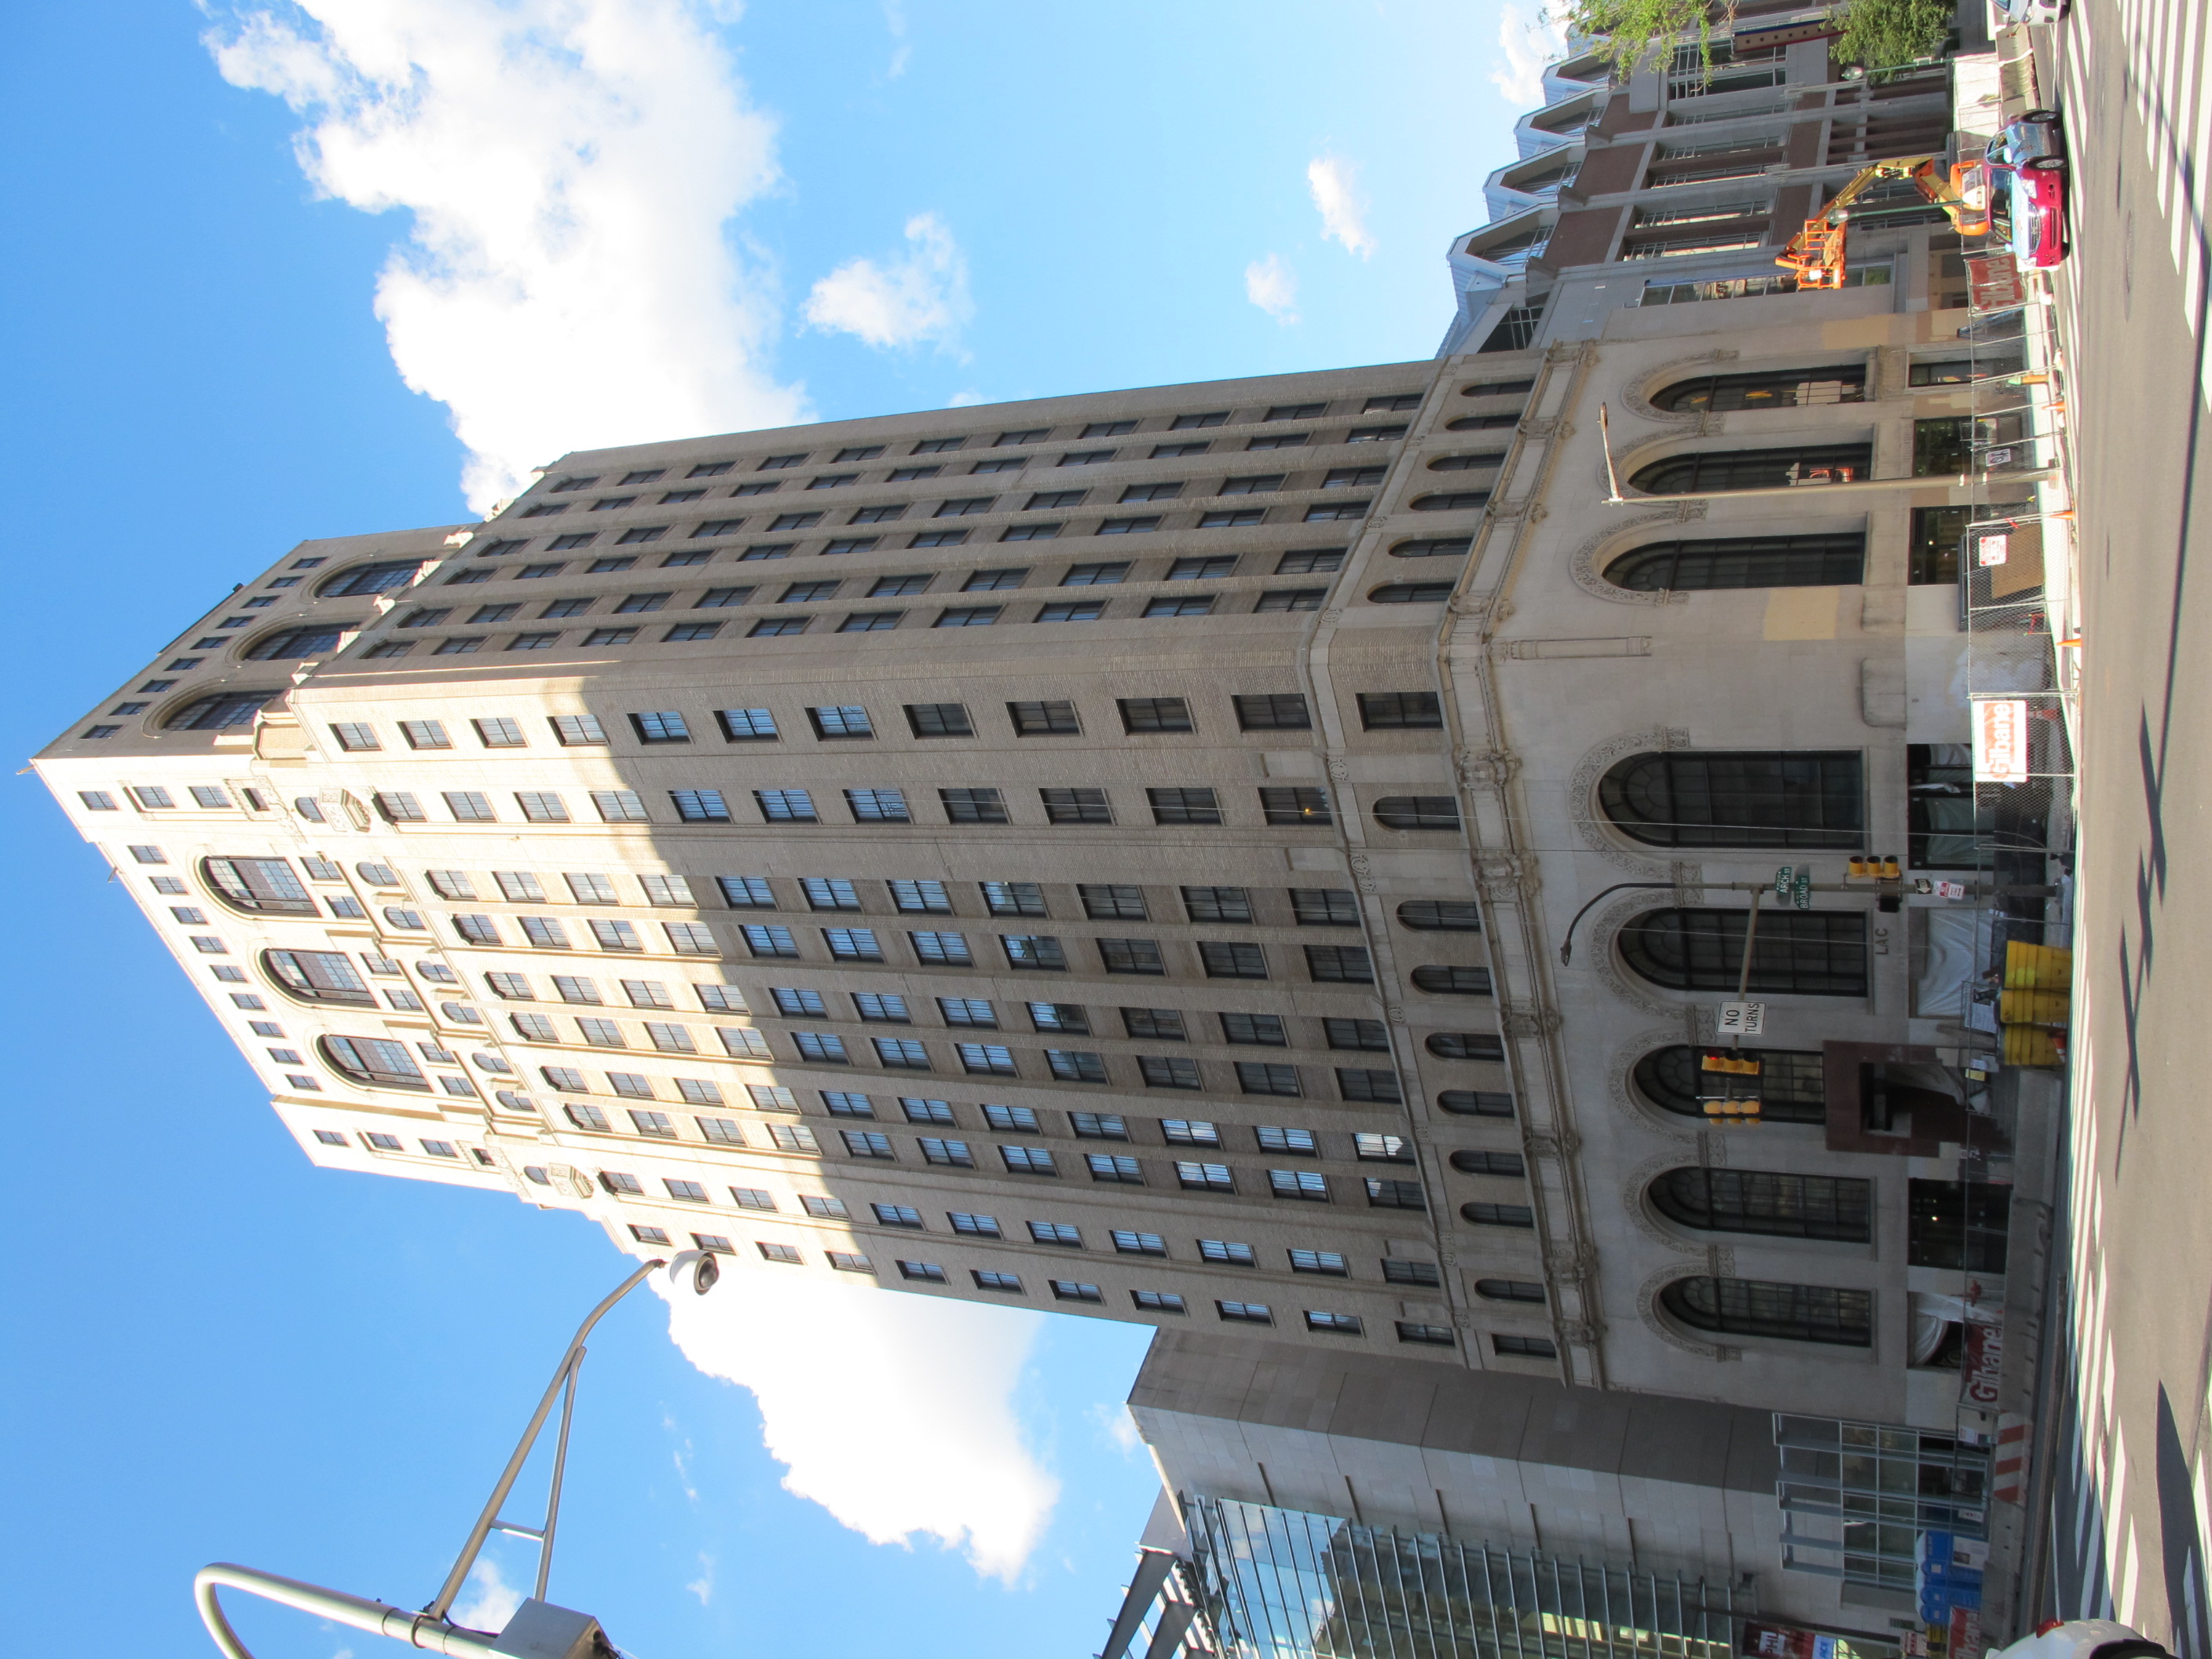 Liberty Title and Trust building at Broad and Arch will reopen as an Aloft hotel.